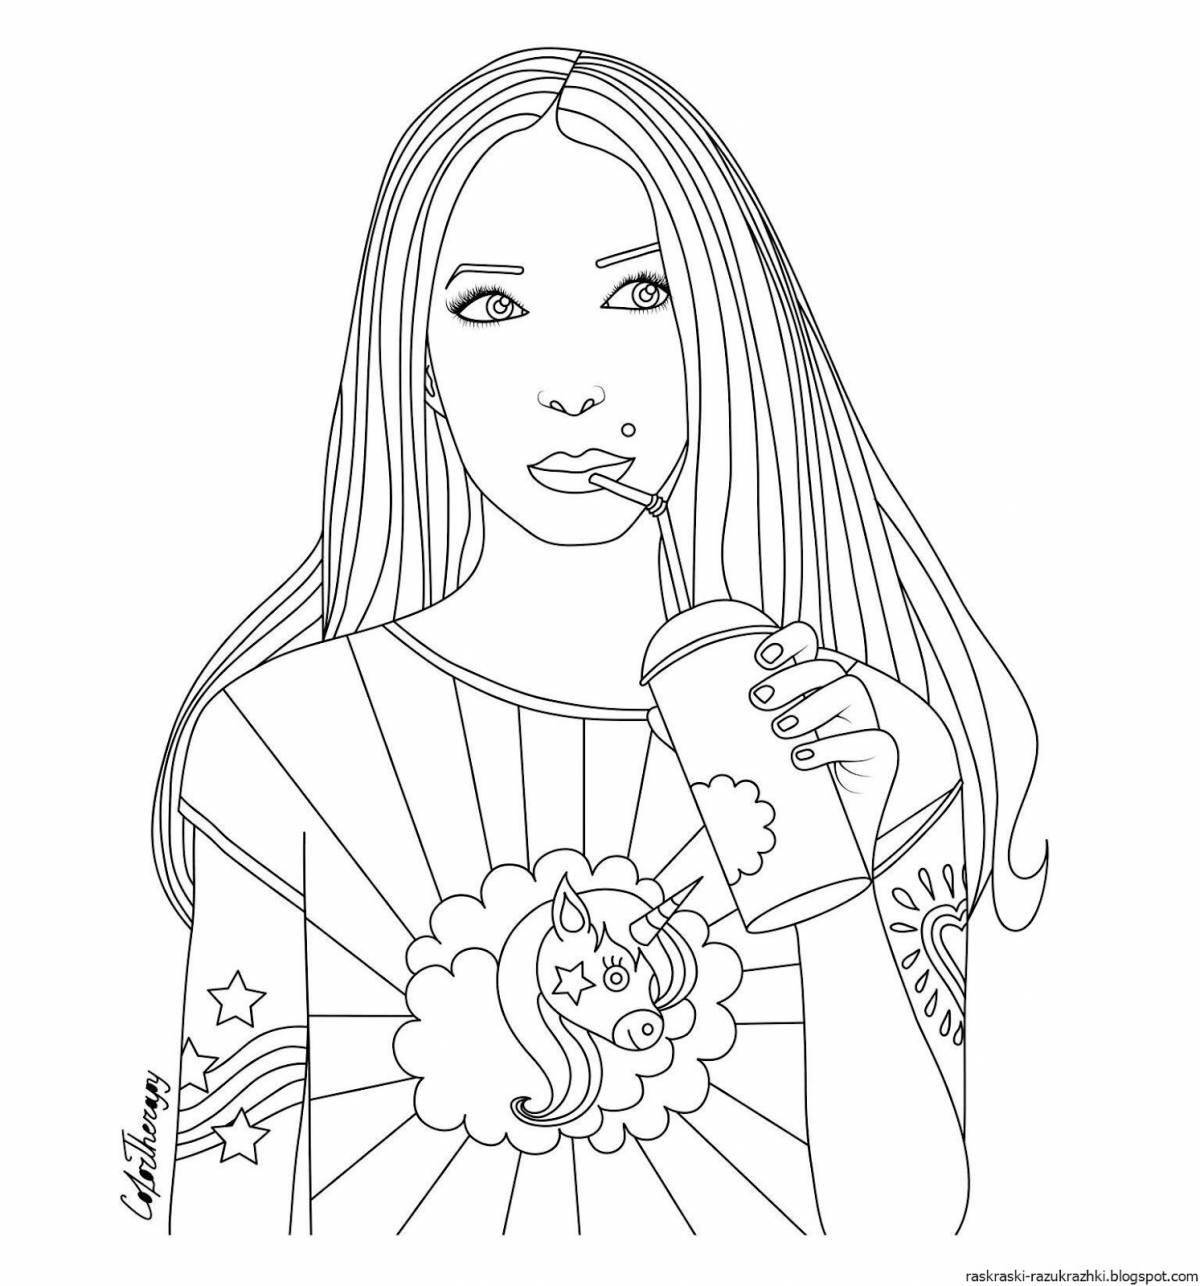 Amazing coloring pages for girls 16-17 years old